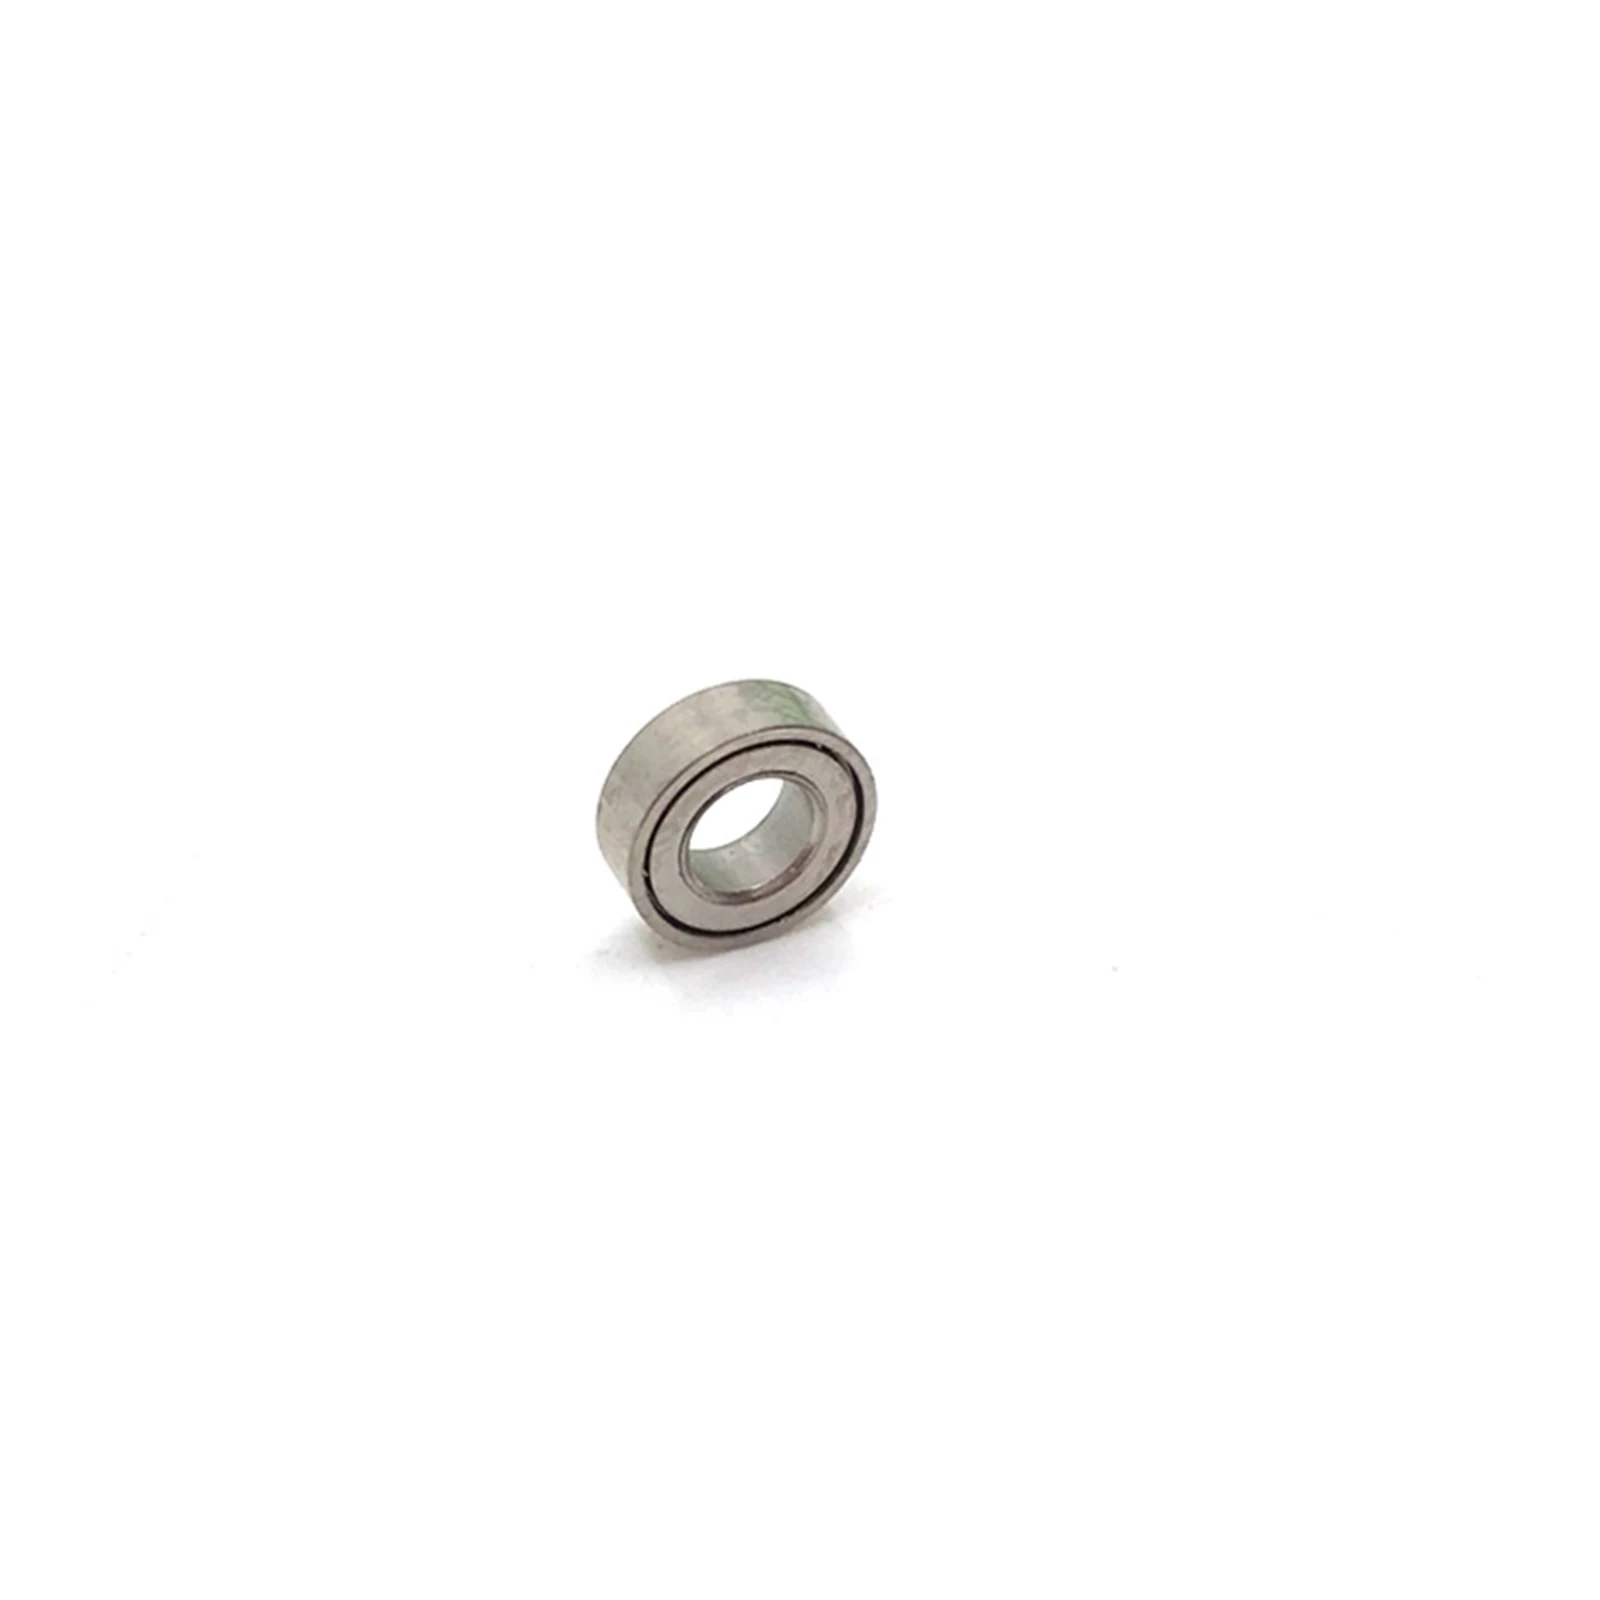 Repalcement Metal 3x6x2mm Ball Bearing Spare Accessory for WPL D12 C14 C24 C34 C44 B16 B24 Part